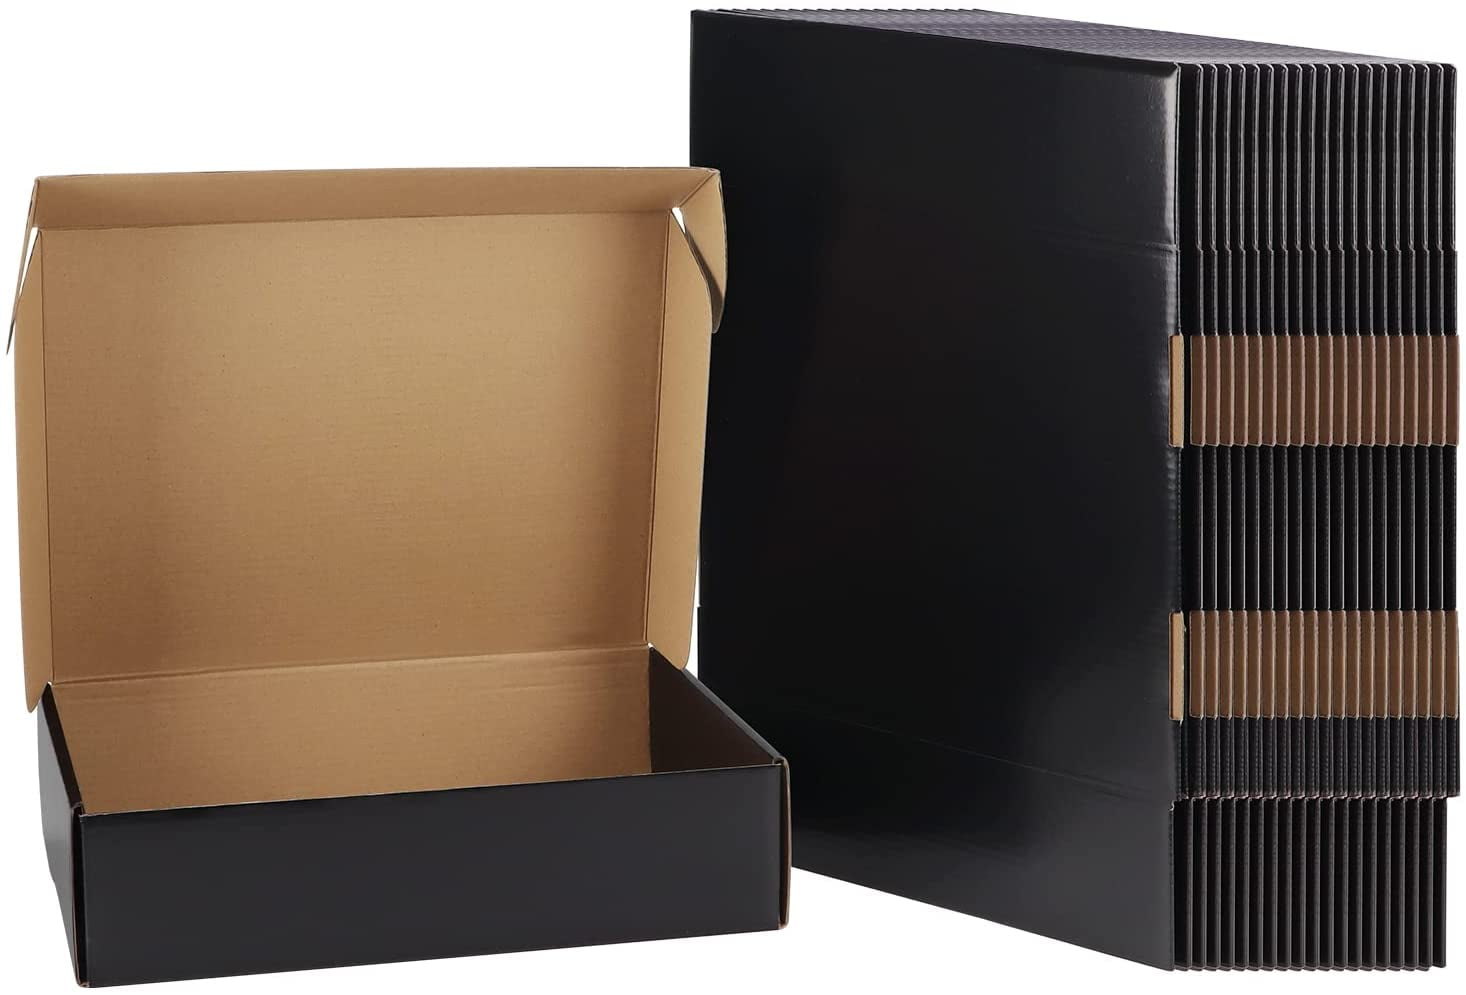 Calenzana 12x9x3 Shipping Boxes Set of 20, Black Corrugated Box Cardboard  Boxes for Packaging and Mailing, Small Business 